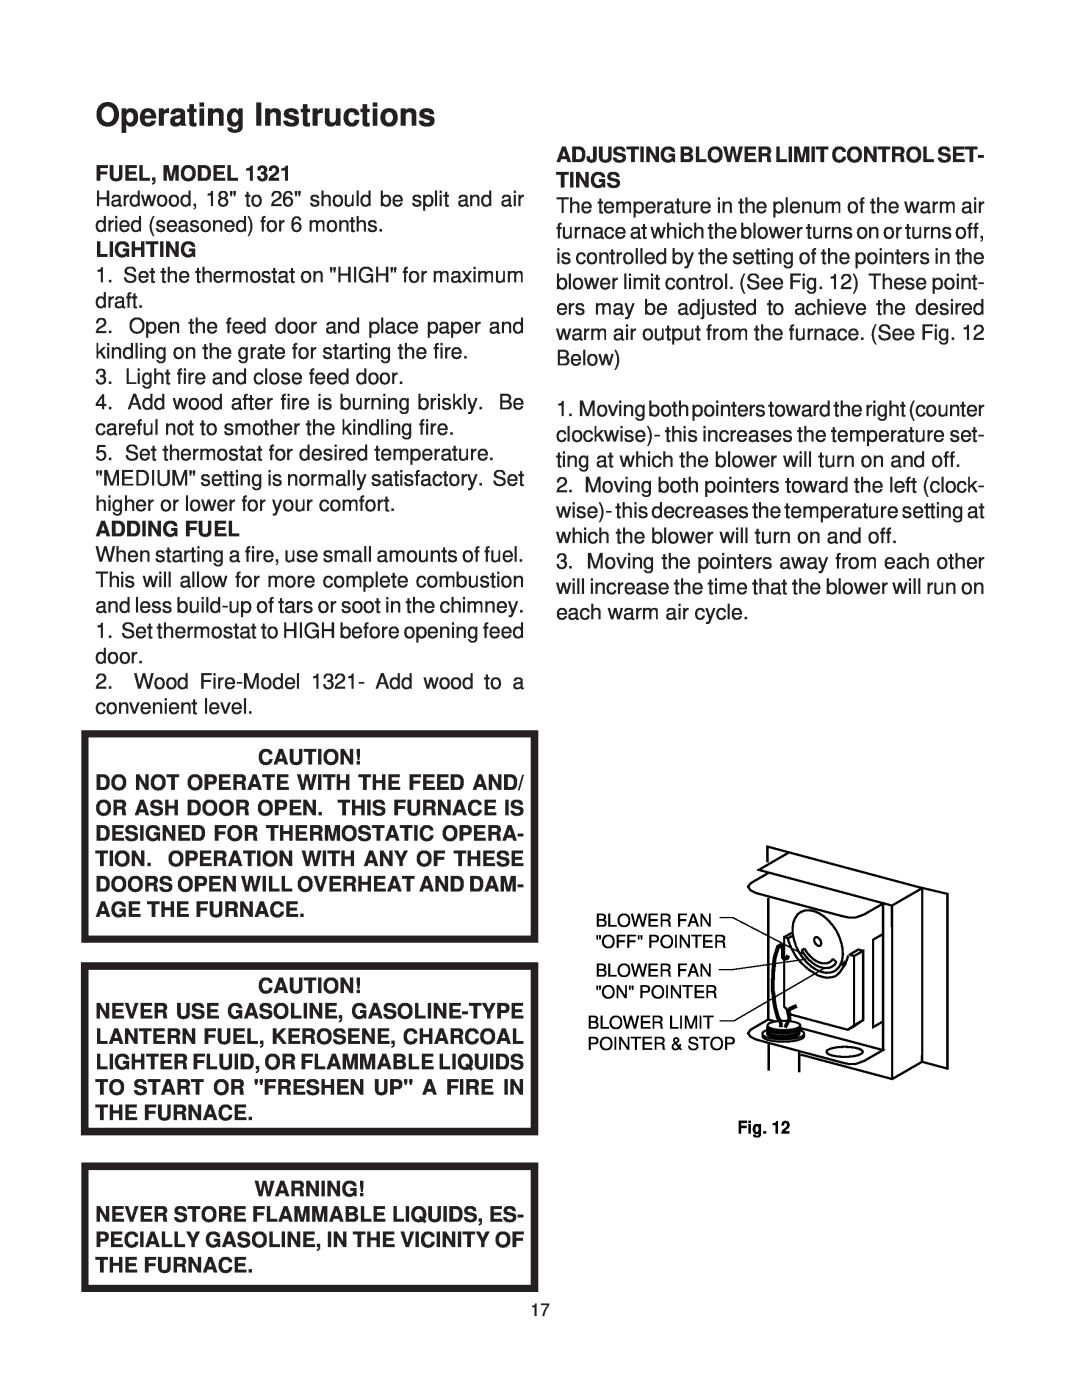 United States Stove 1321 warranty Operating Instructions, Fuel, Model, Lighting, Adding Fuel 